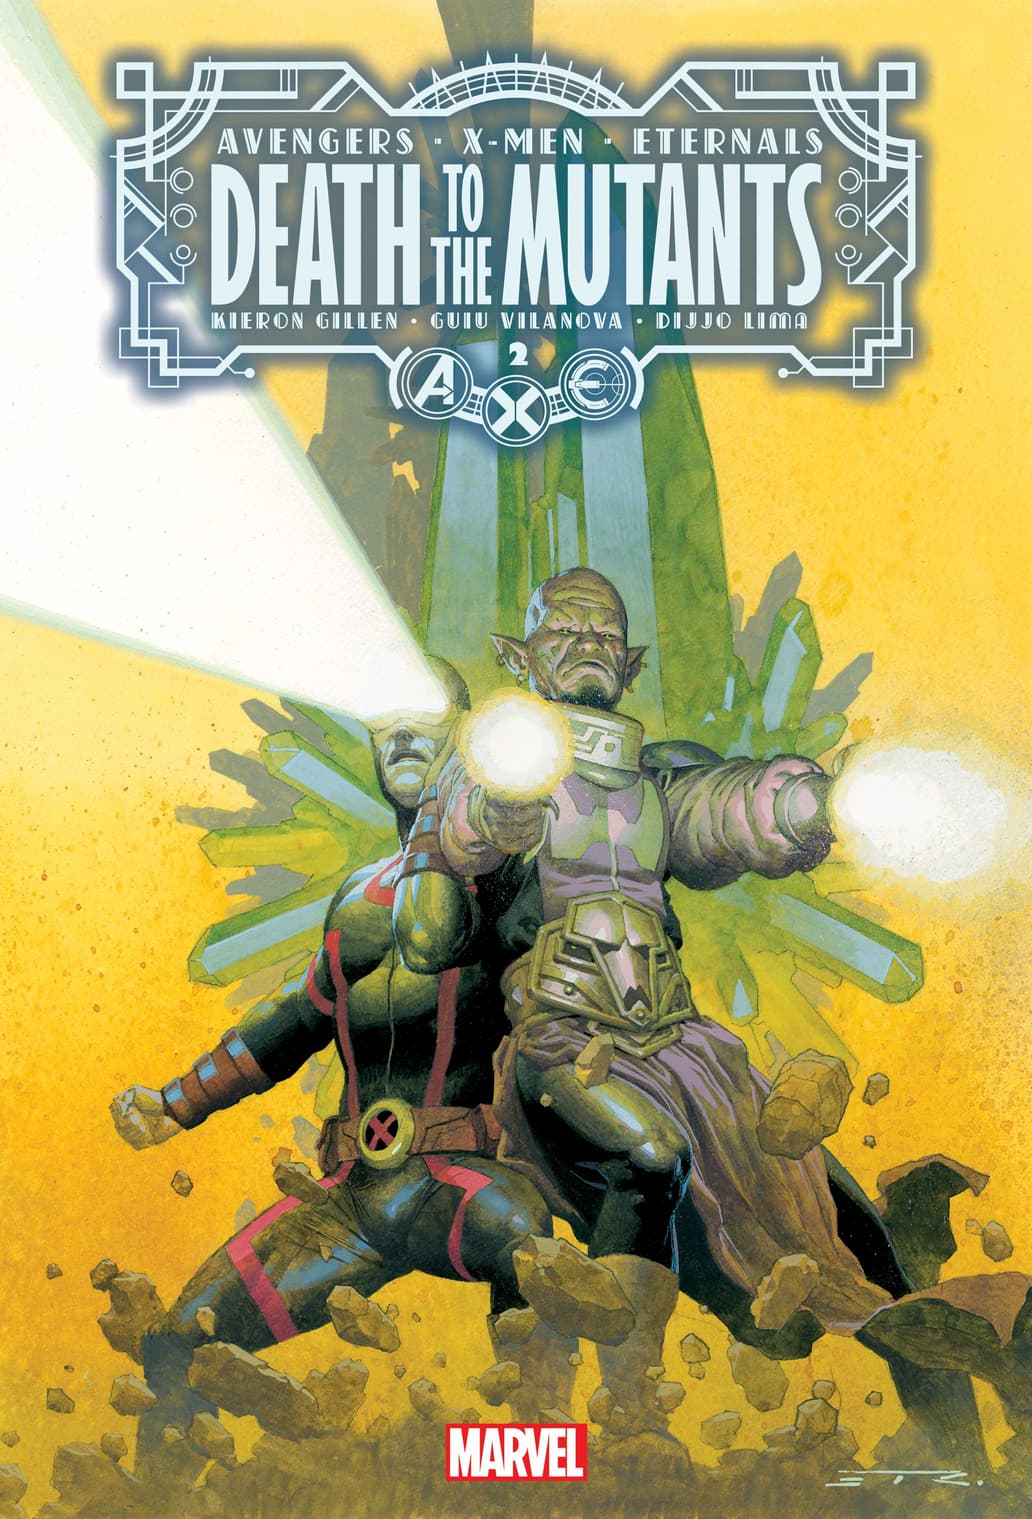 A.X.E.: DEATH TO THE MUTANTS #2 cover by Esad Ribić